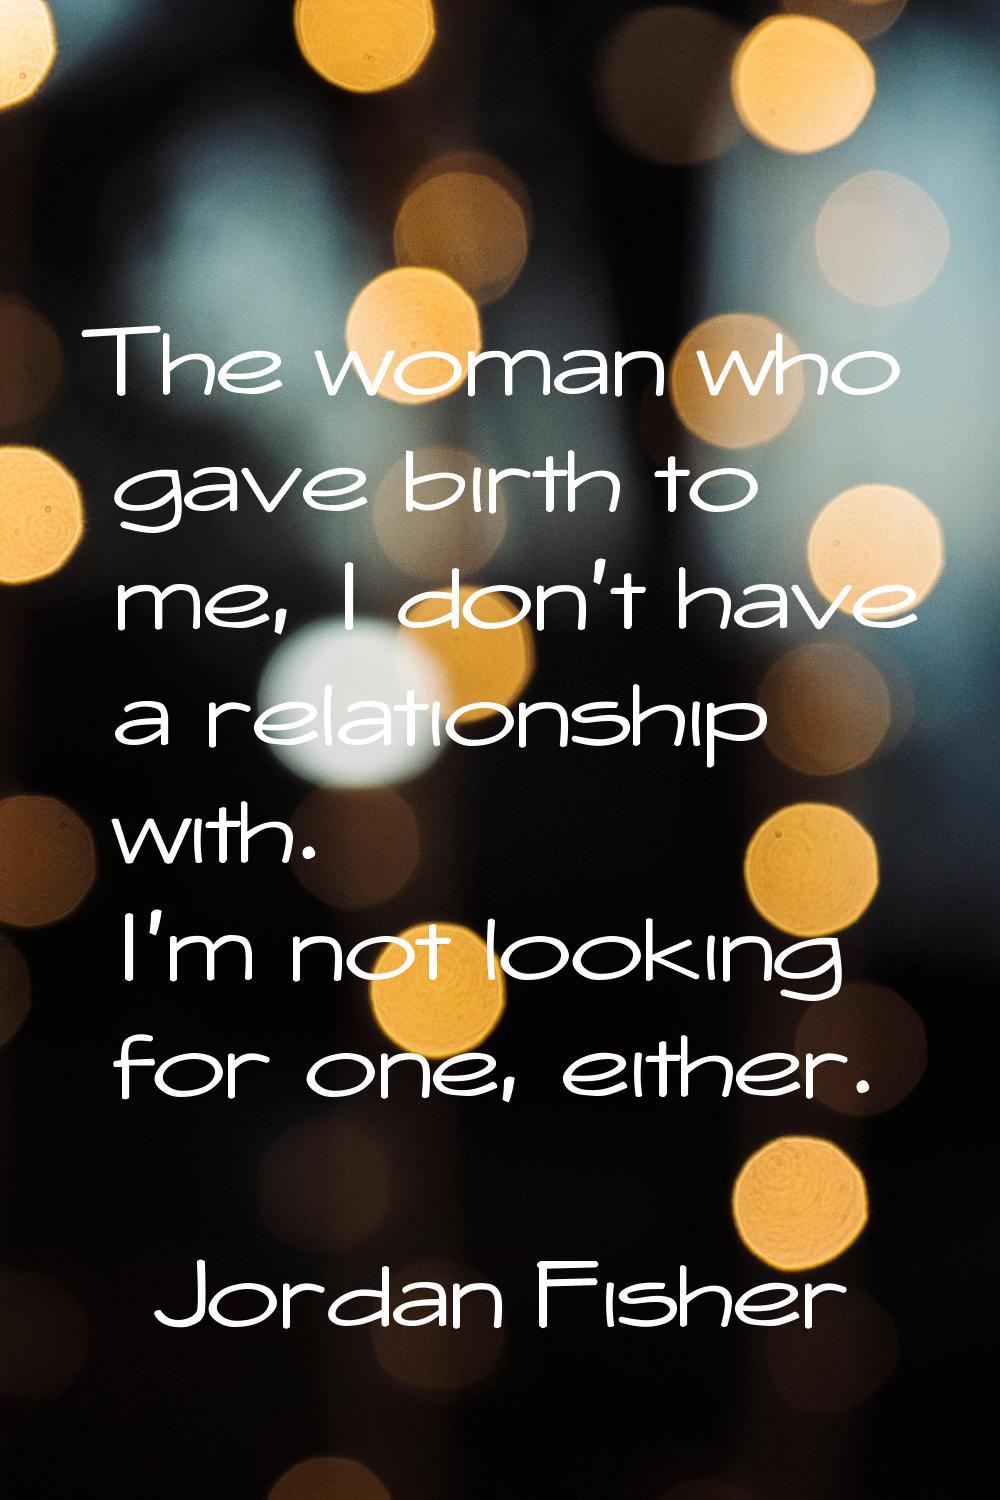 The woman who gave birth to me, I don't have a relationship with. I'm not looking for one, either.